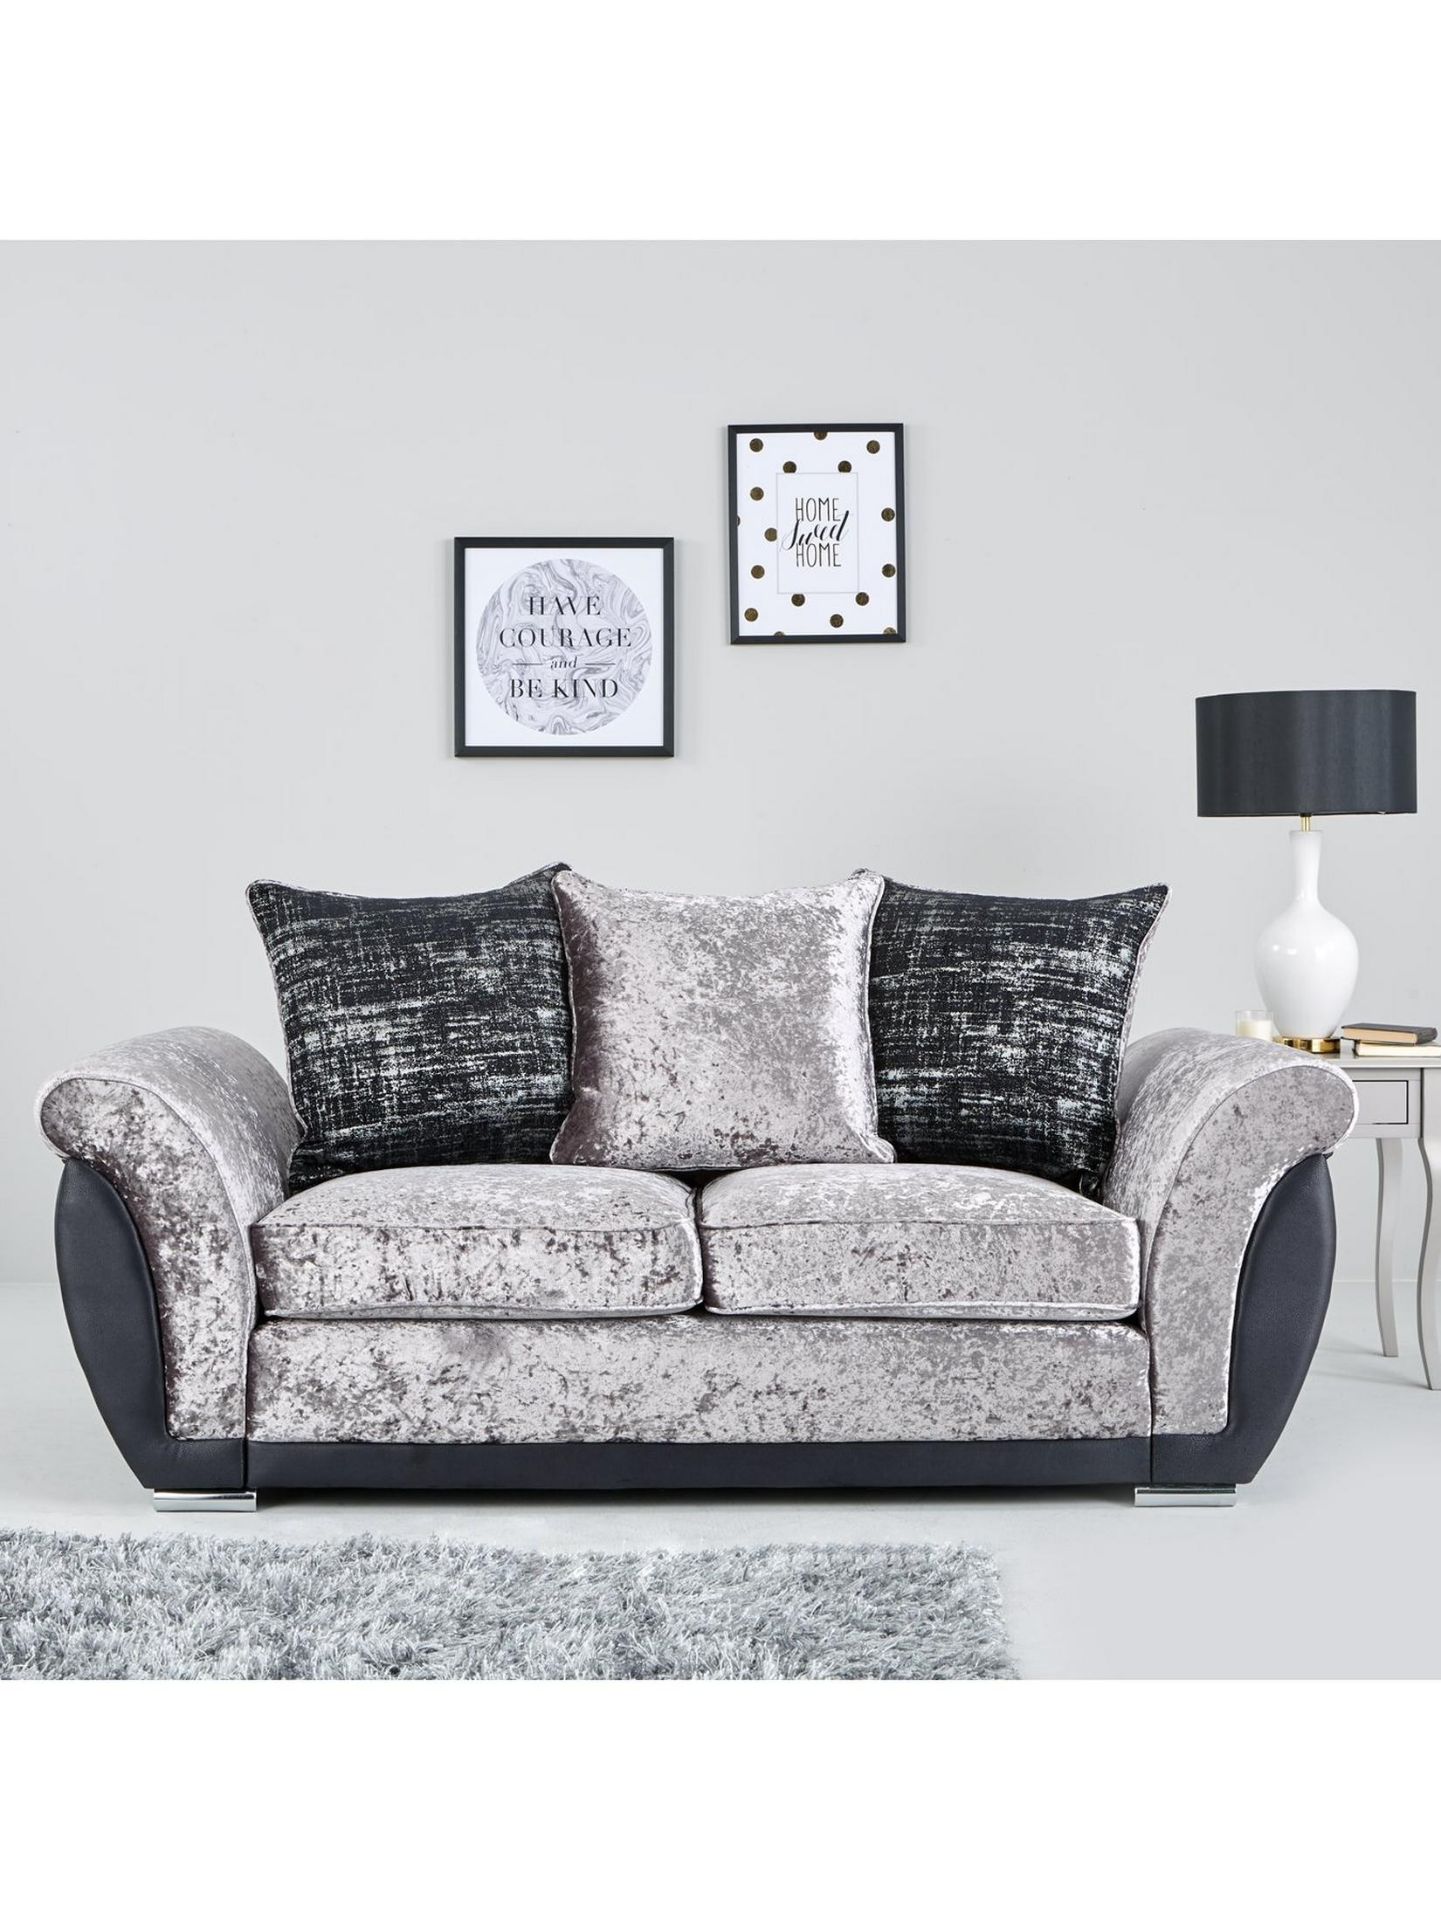 Alexa 2 Seater Sofa. RPP £589.00 . H 93 x W 192 x D 95 cm A trio of textures The supple faux leather